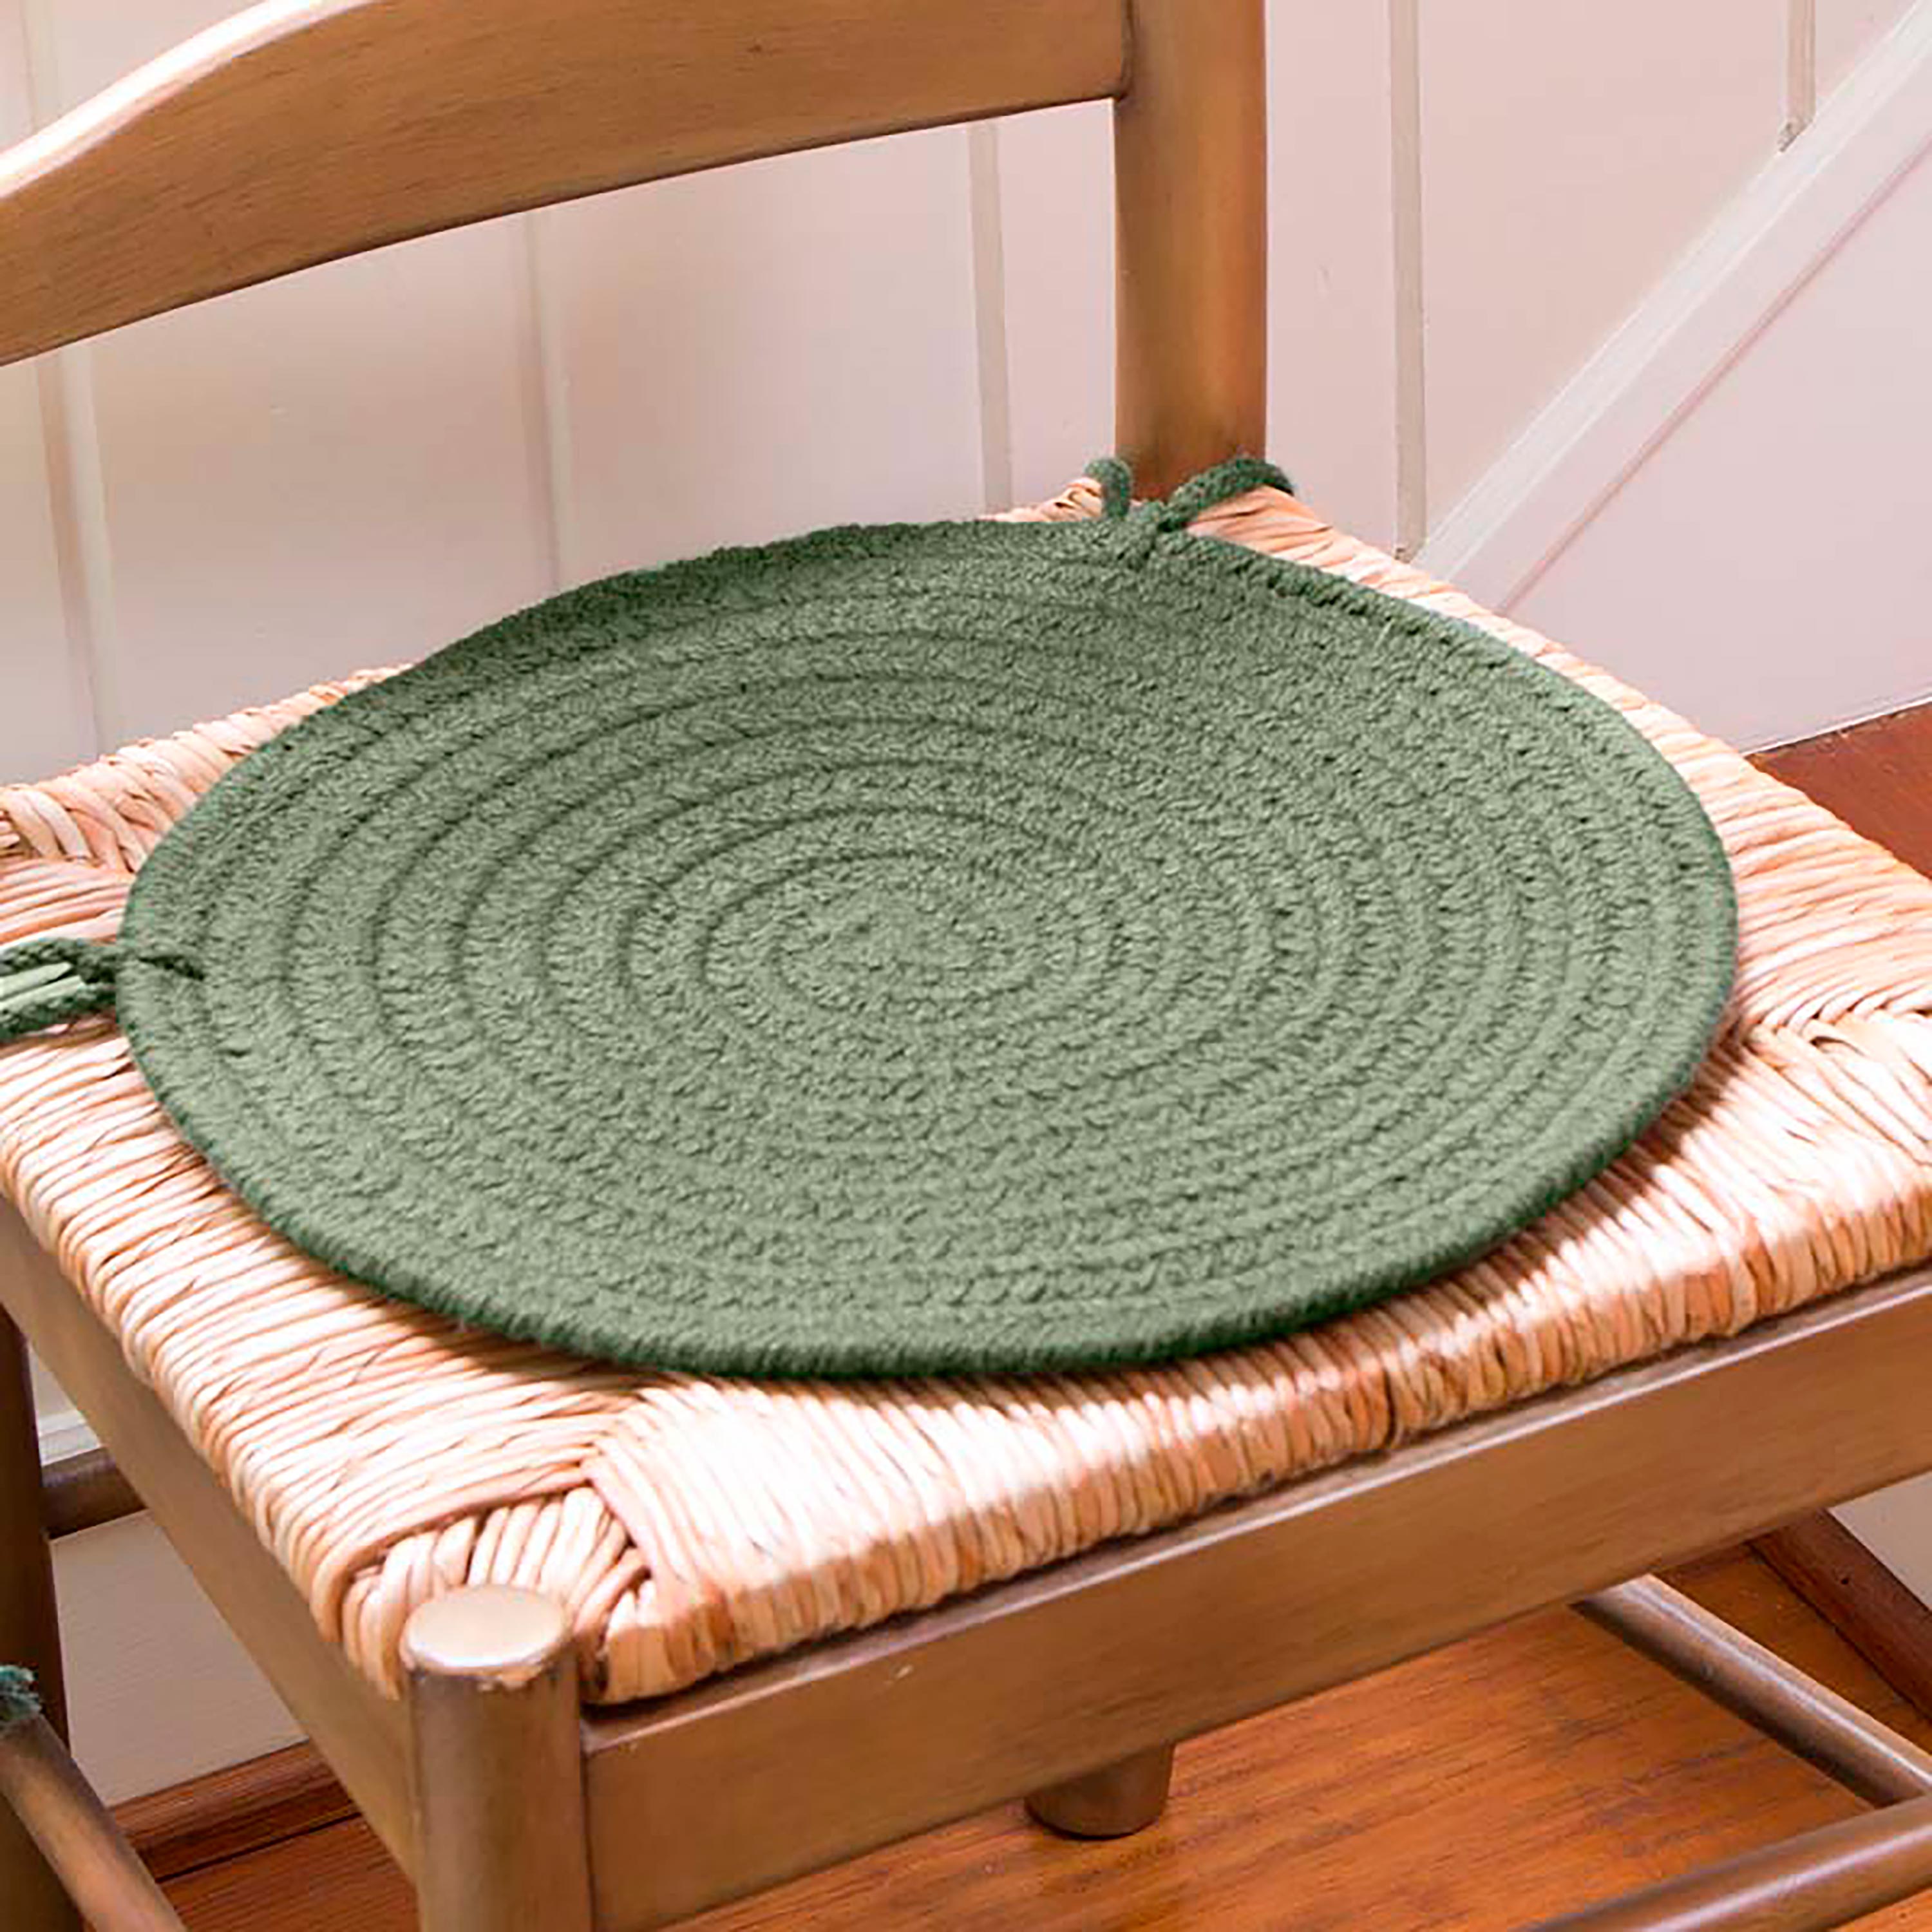 Image of 15" Dia. Color Country Classic Braided Polypro Chair Pad, Dark Sage